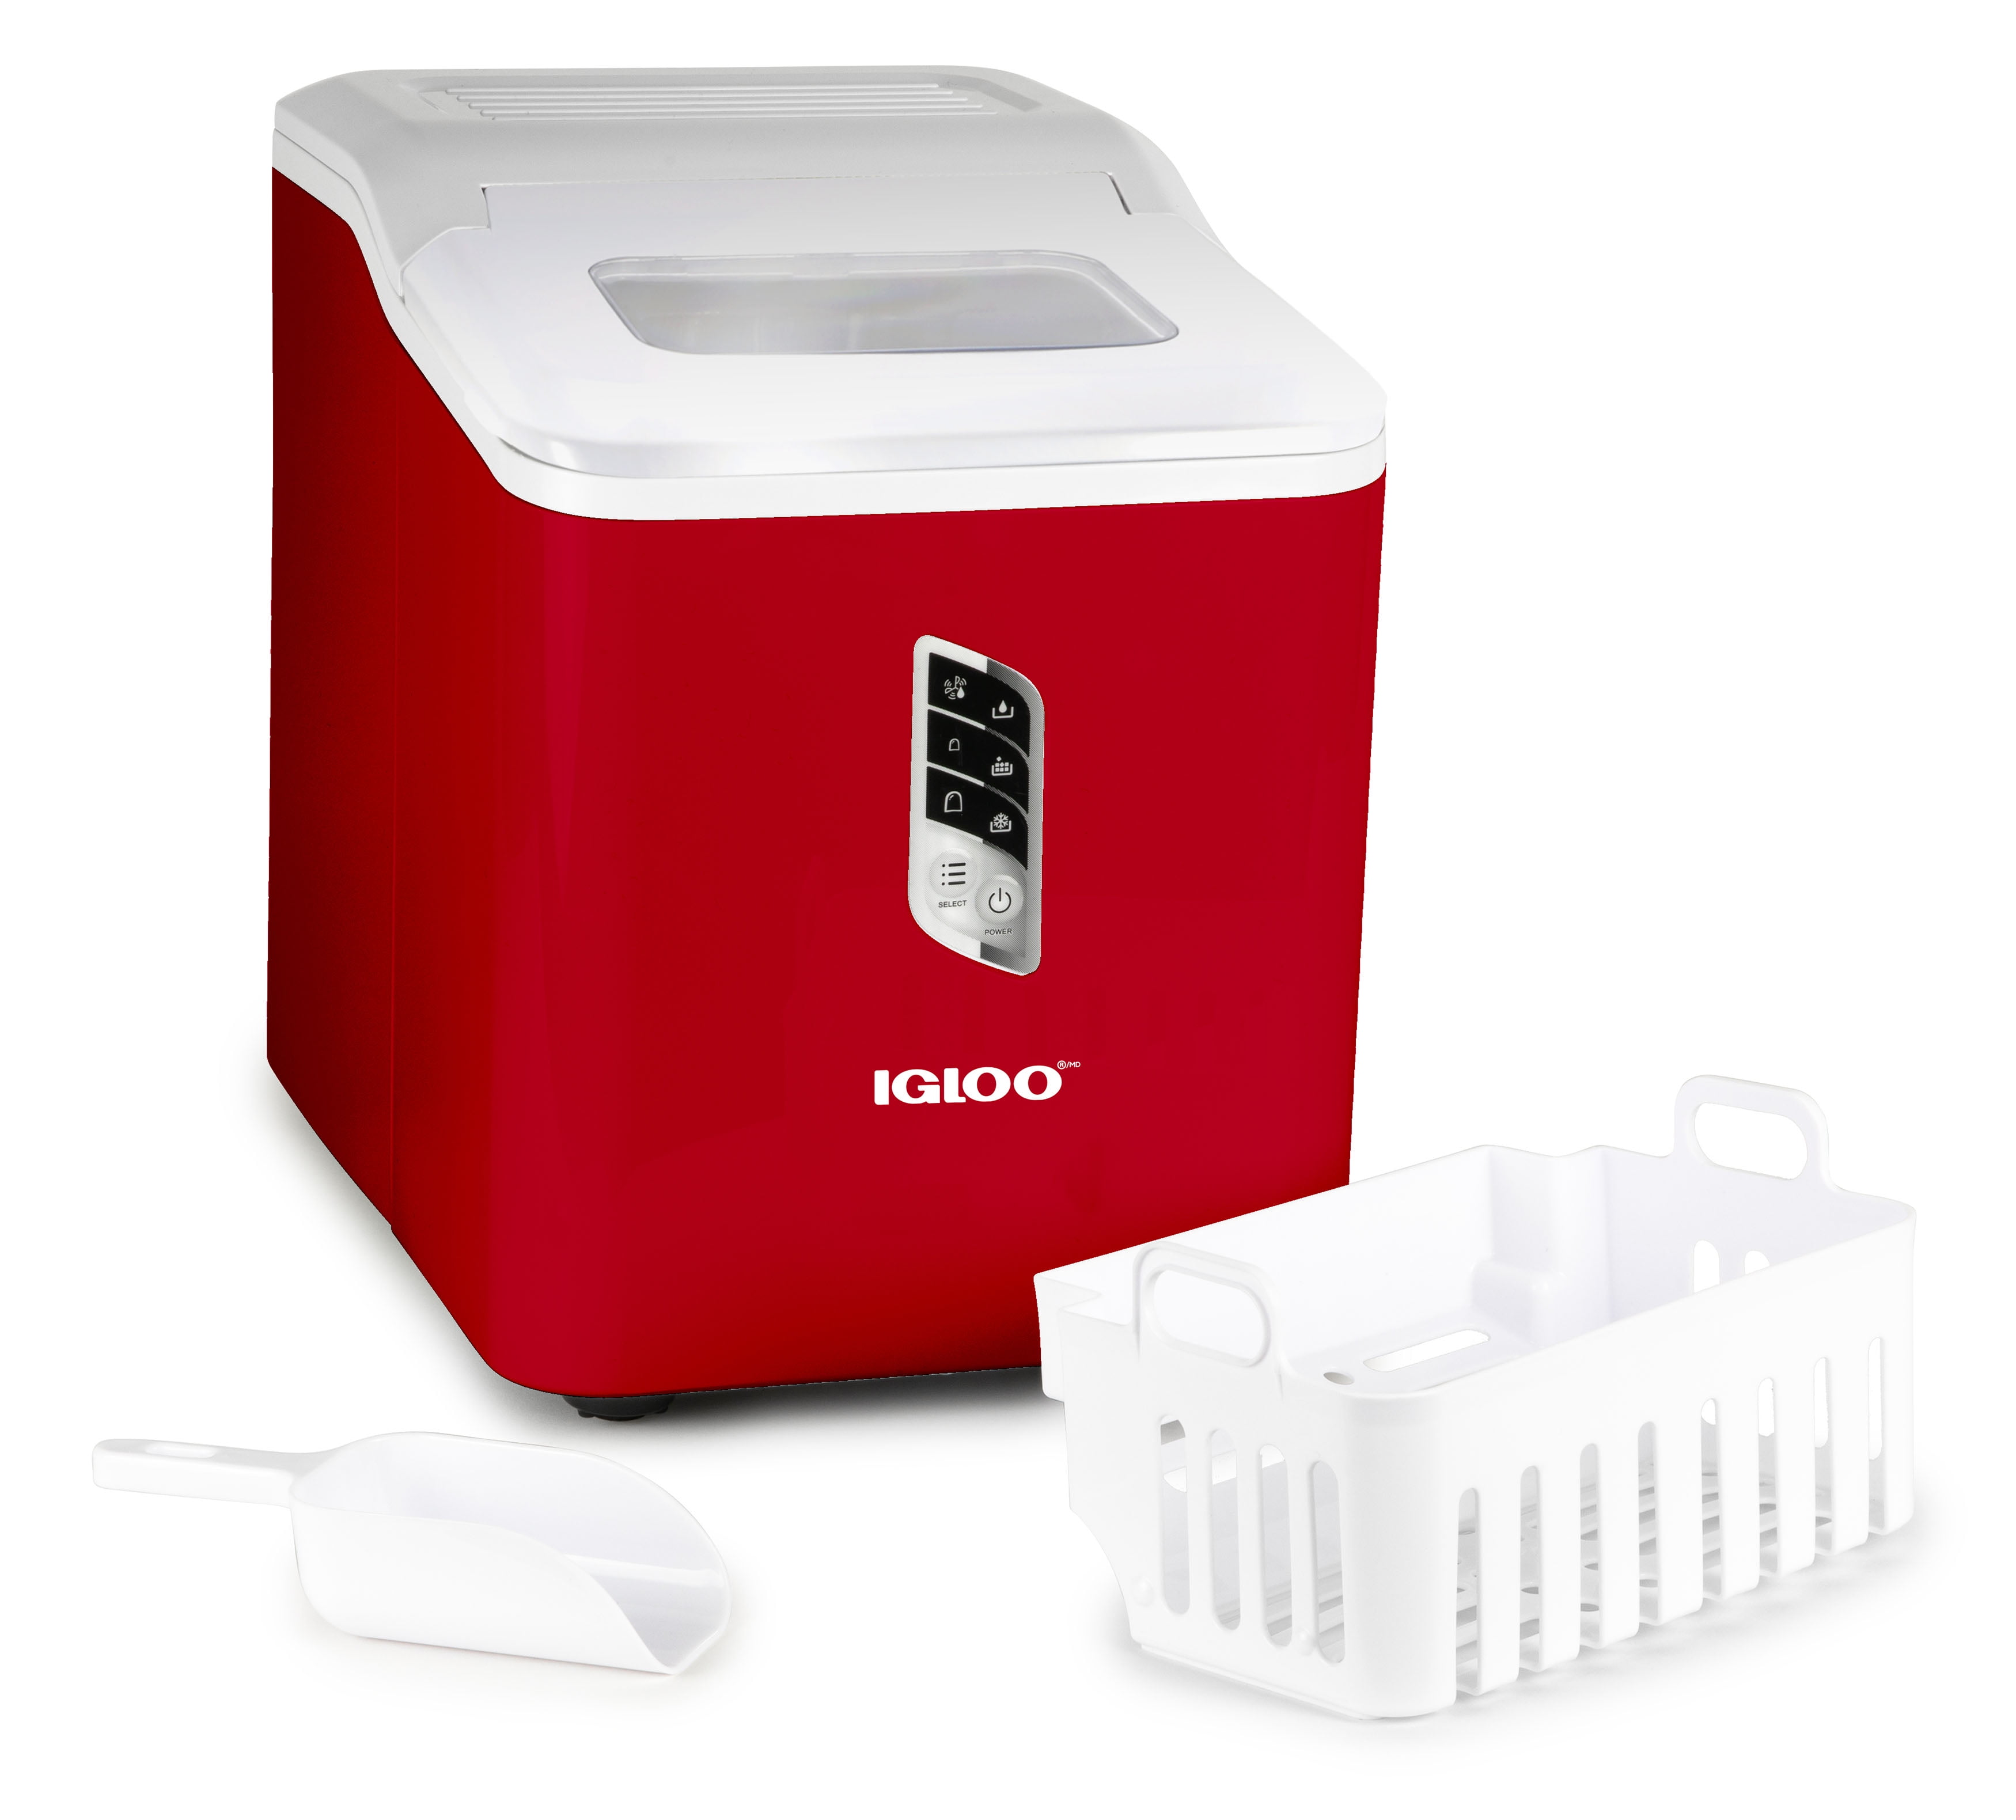 Igloo Automatic Self-Cleaning 26 lb Ice Maker, White